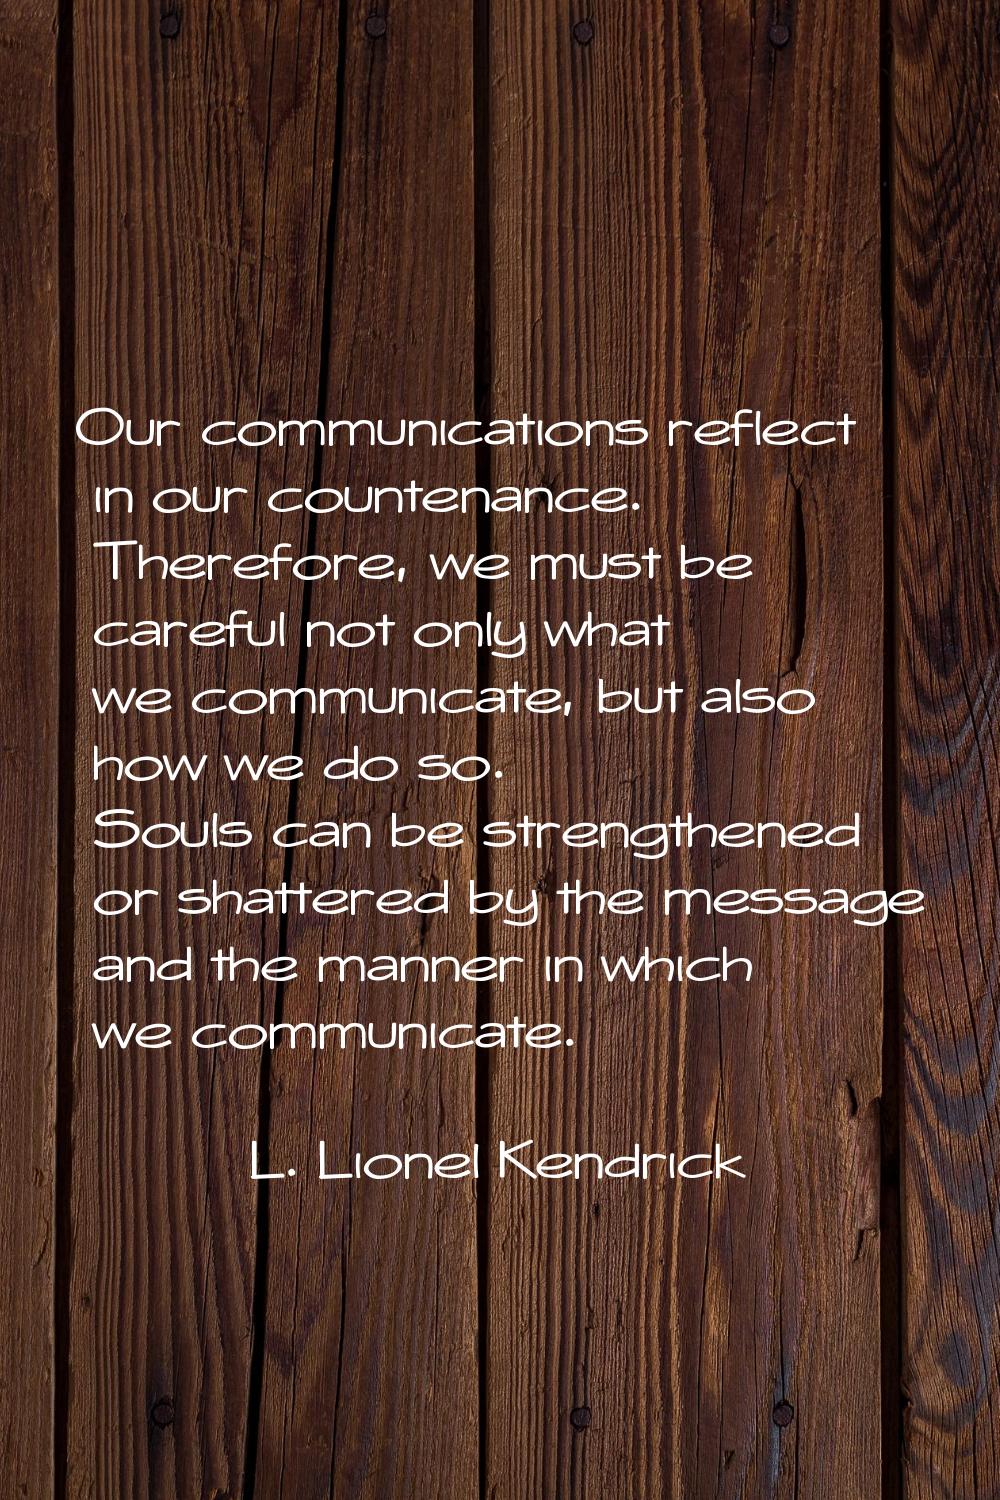 Our communications reflect in our countenance. Therefore, we must be careful not only what we commu